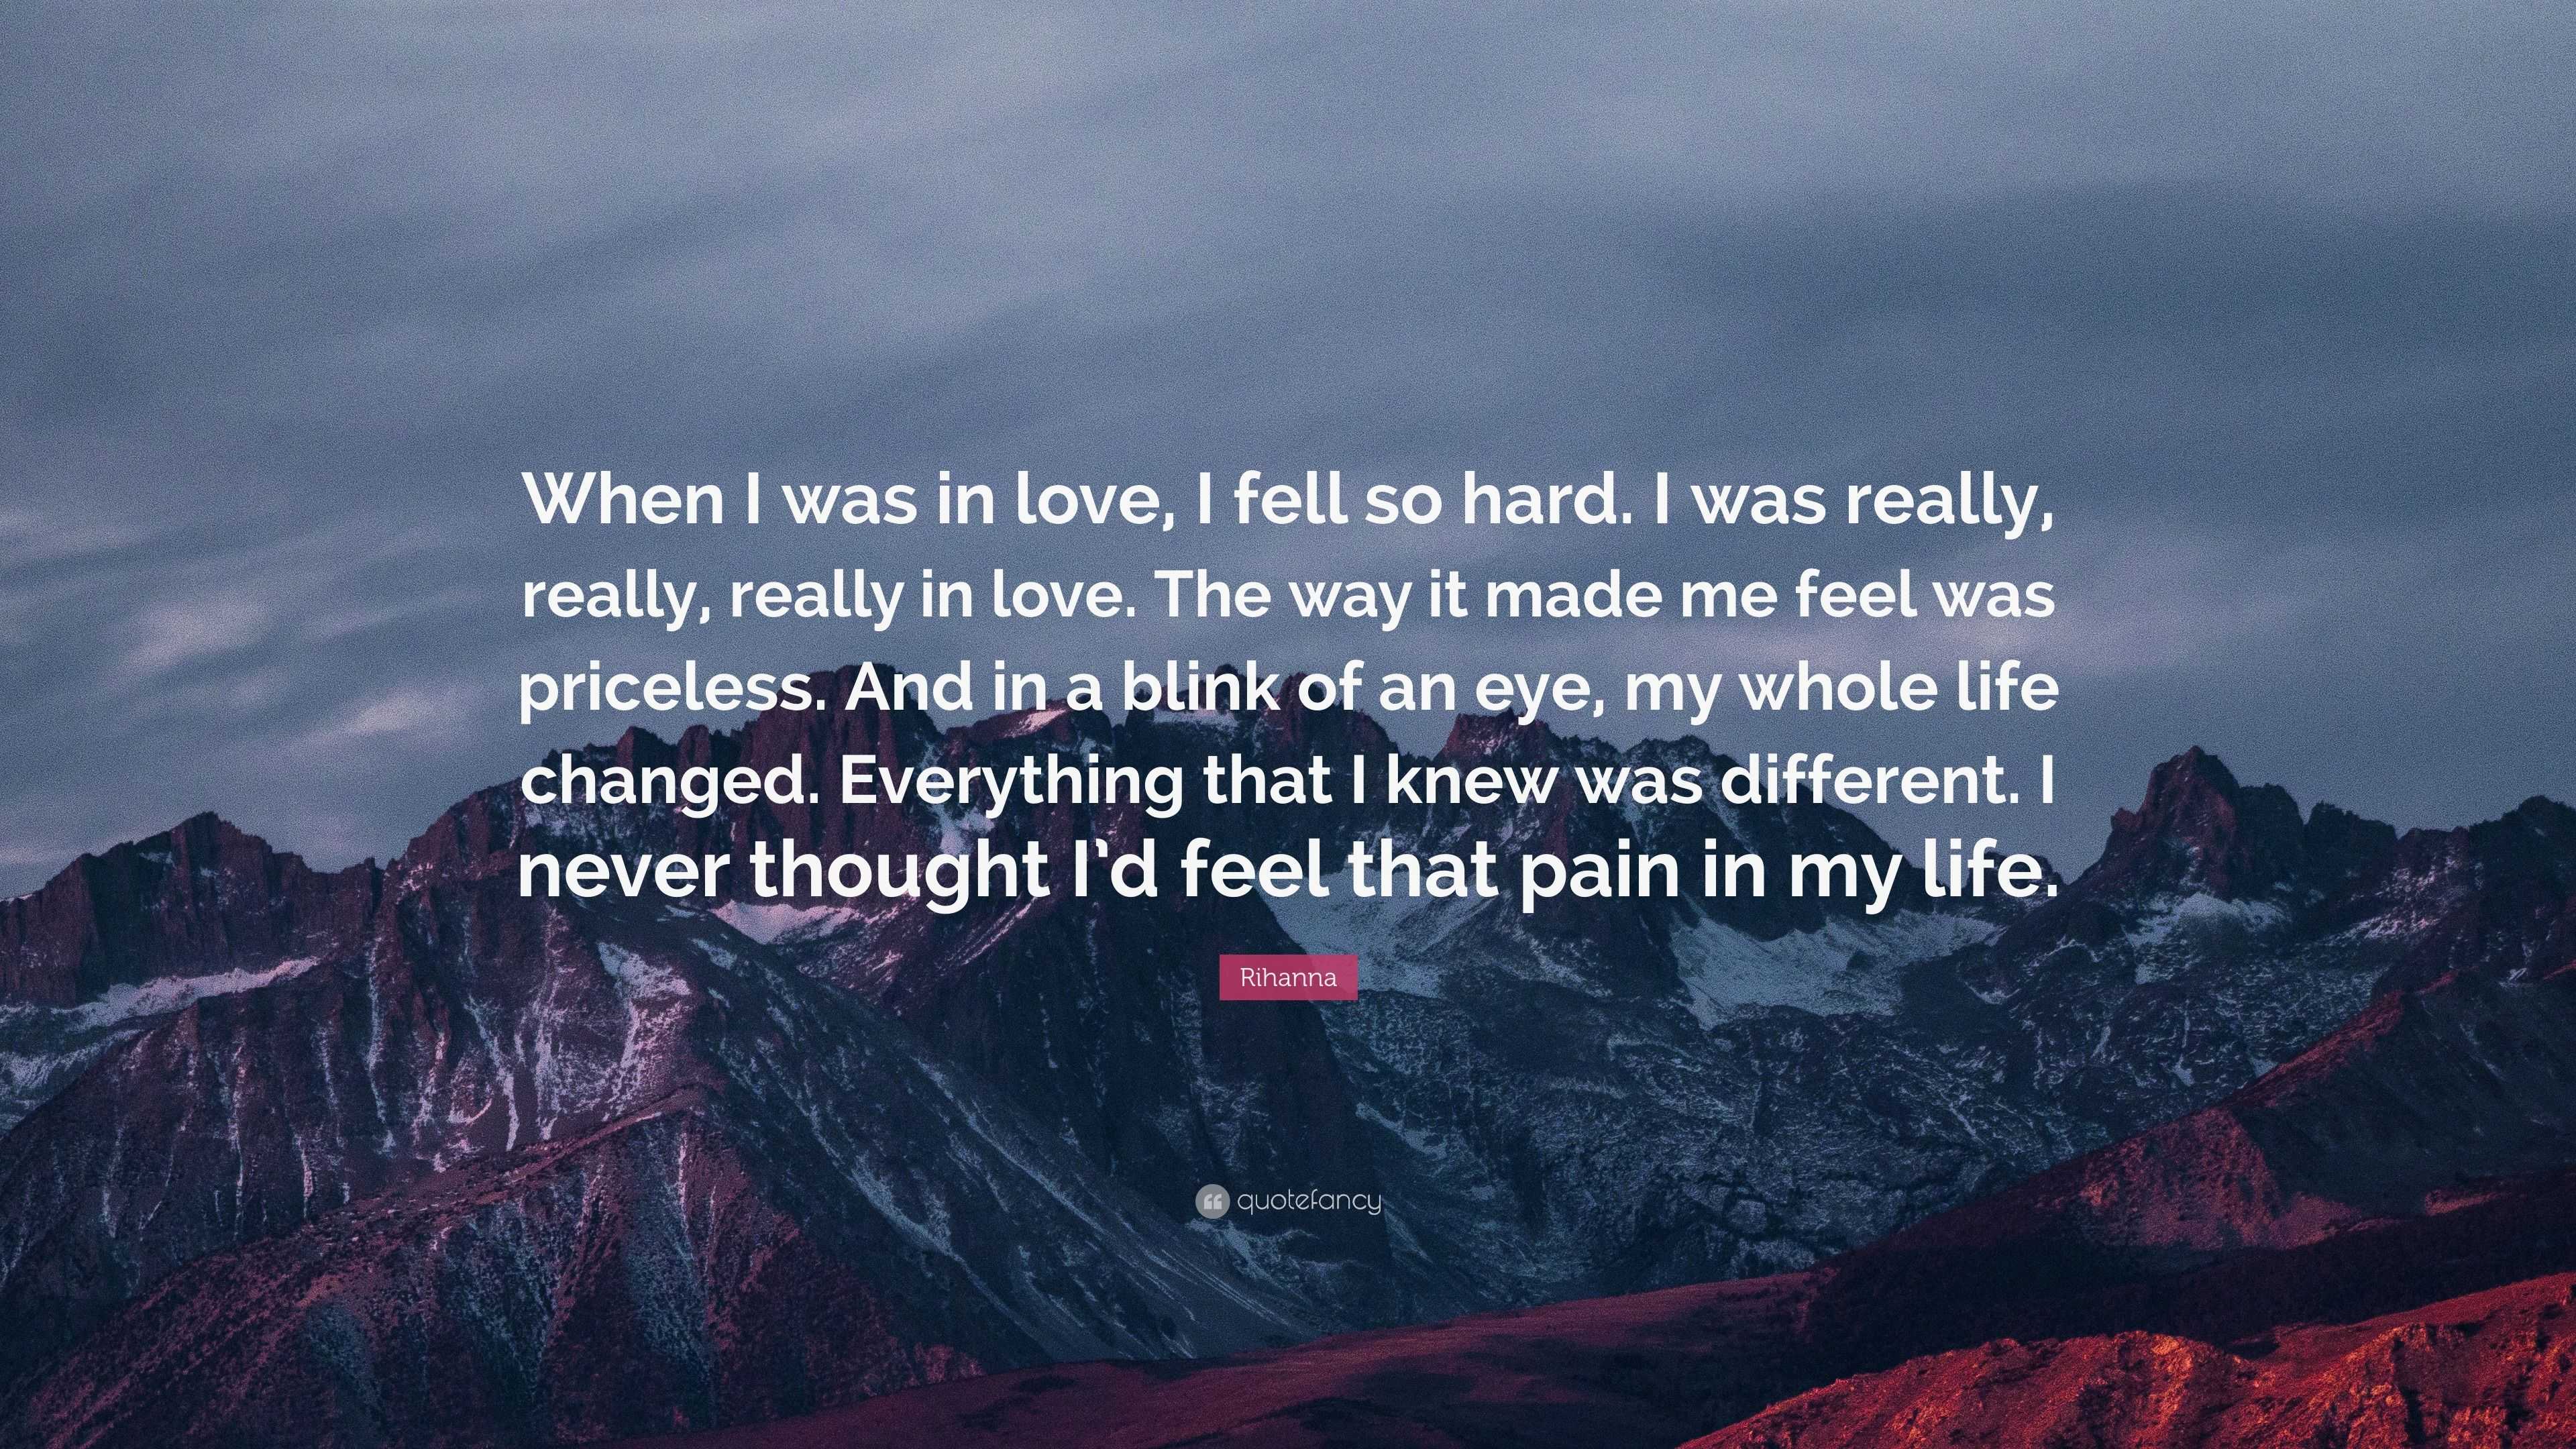 Rihanna Quote: “When I was in love, I fell so hard. I was really ...